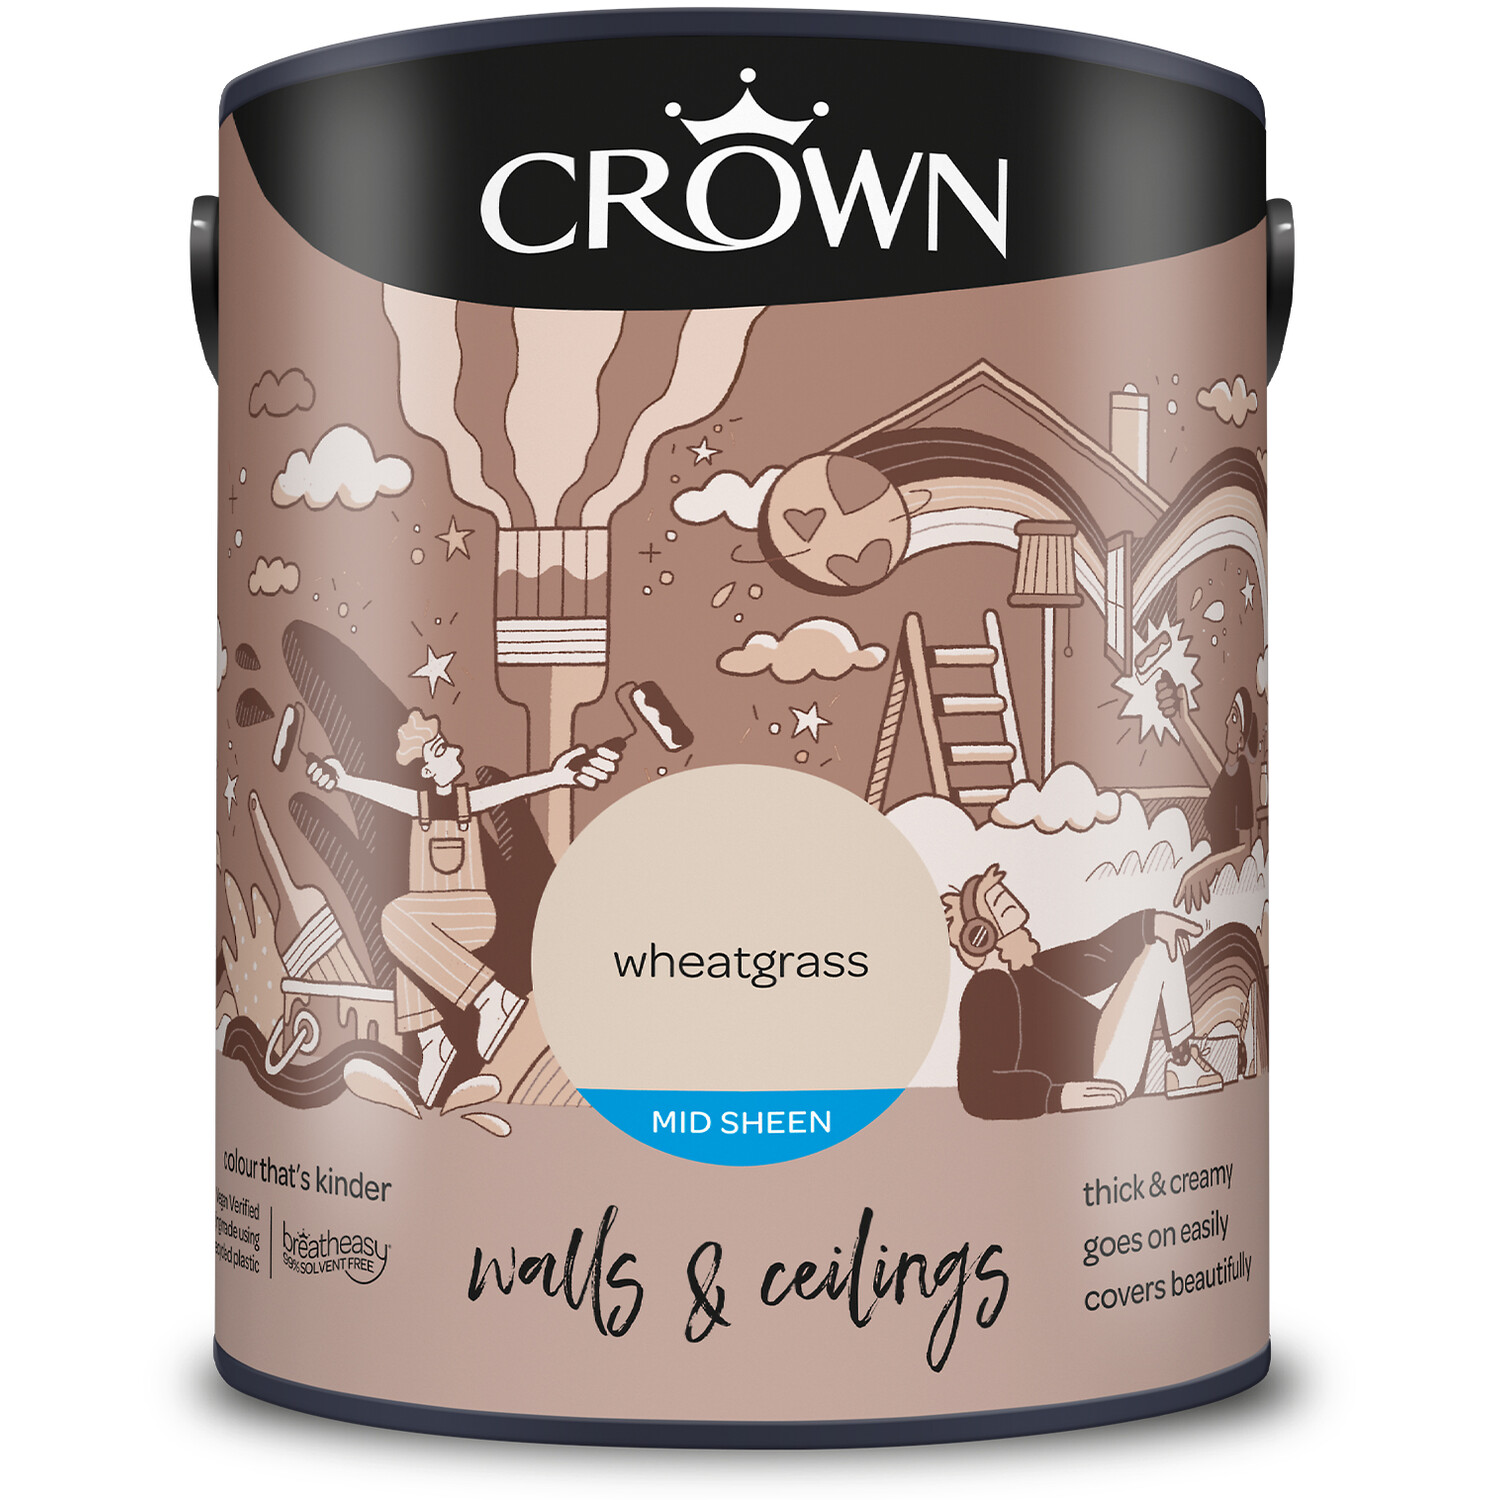 Crown Walls & Ceilings Wheatgrass Mid Sheen Emulsion Paint 5L Image 2